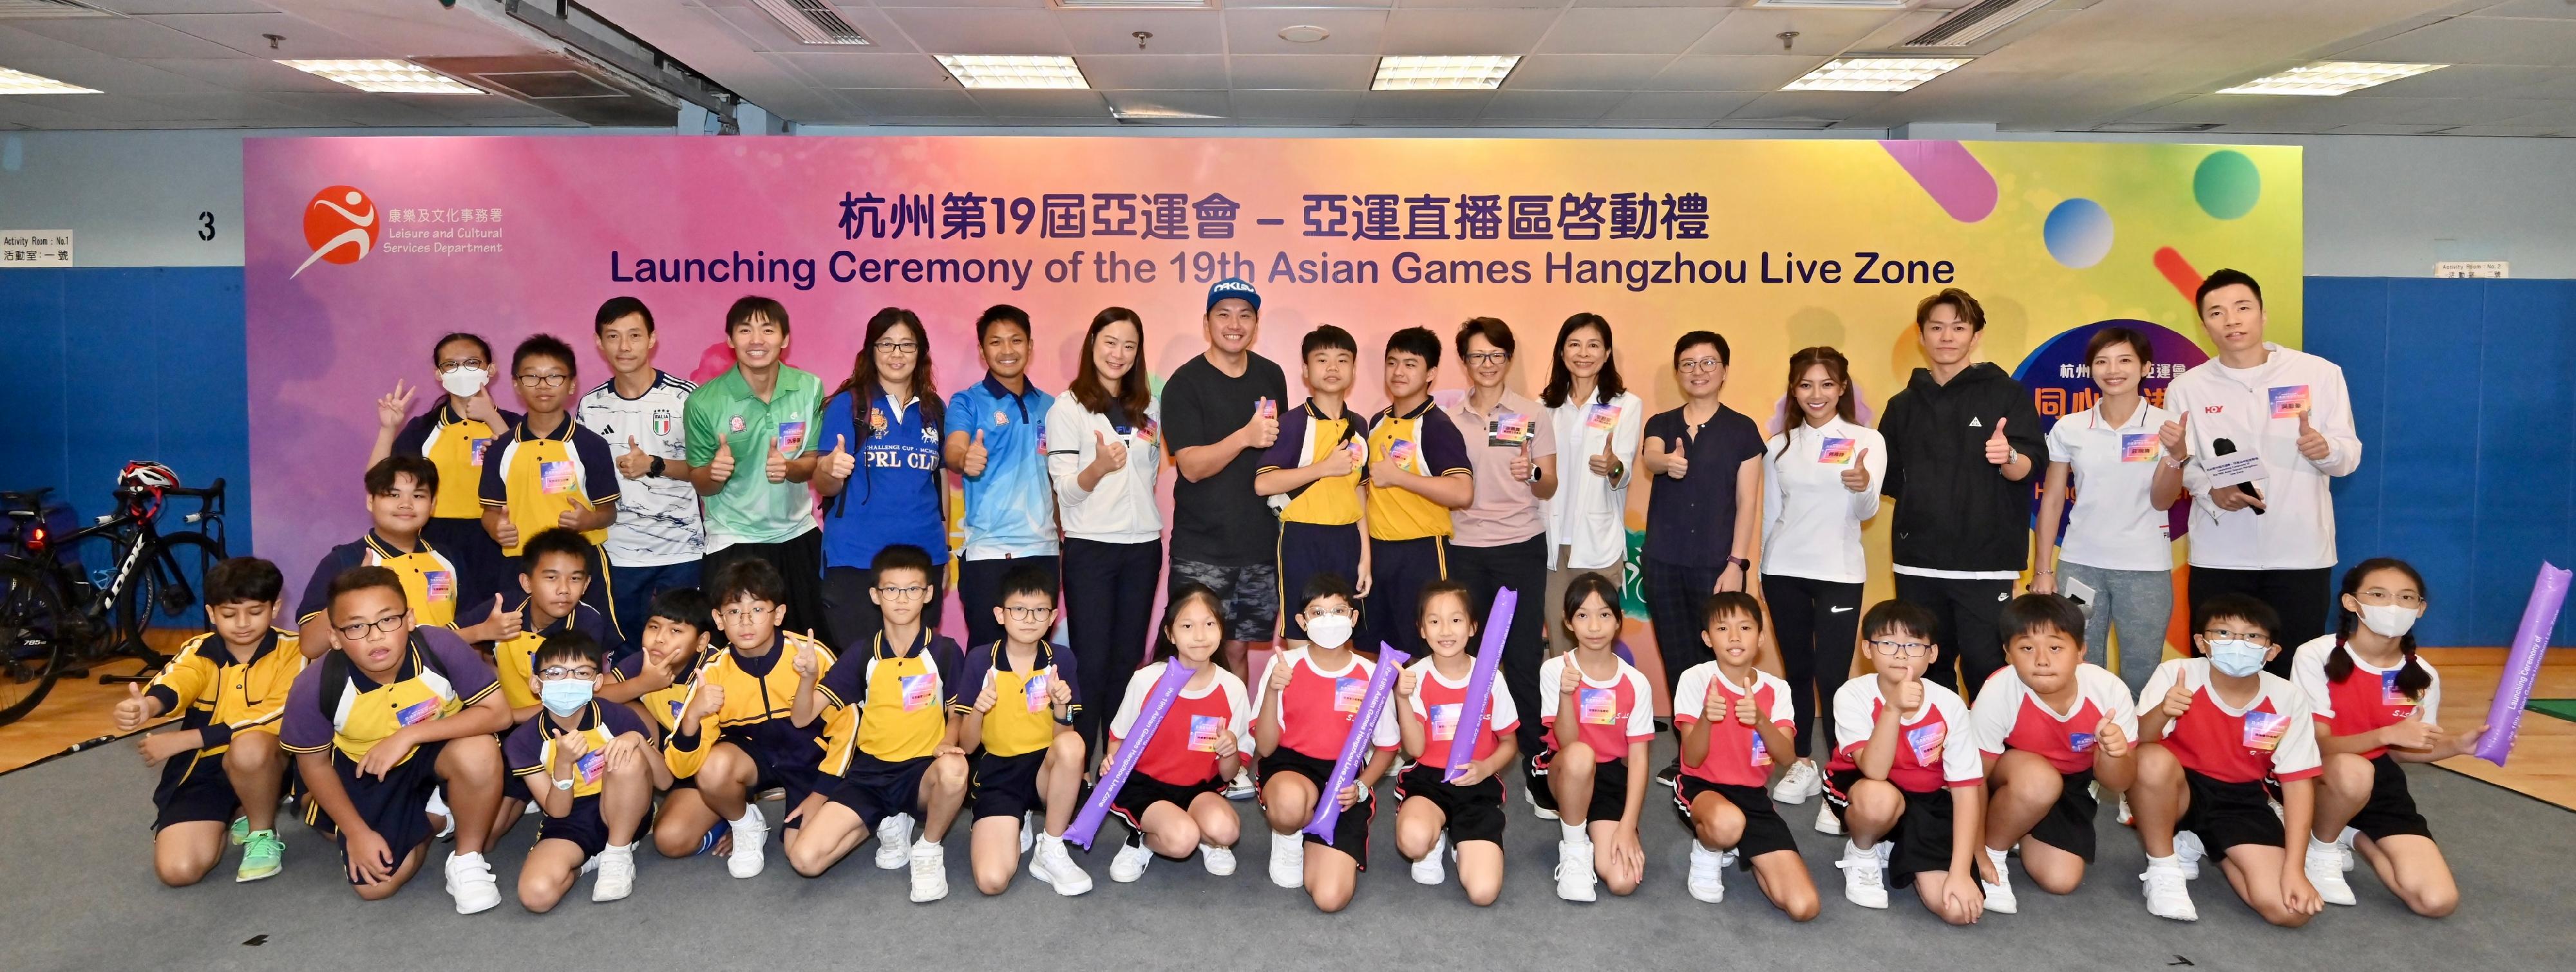 The Leisure and Cultural Services Department held the "Launching Ceremony of the 19th Asian Games Hangzhou Live Zone" at the Secondary Hall of the Kowloon Park Sports Centre today (September 23). Photo shows the Acting Director of Leisure and Cultural Services, Miss Winnie Chui (back row, seventh right); the Assistant Director of Leisure and Cultural Services (Leisure Services)2, Ms Olivia Cheung (back row, sixth right) , with other guests and students at the ceremony.